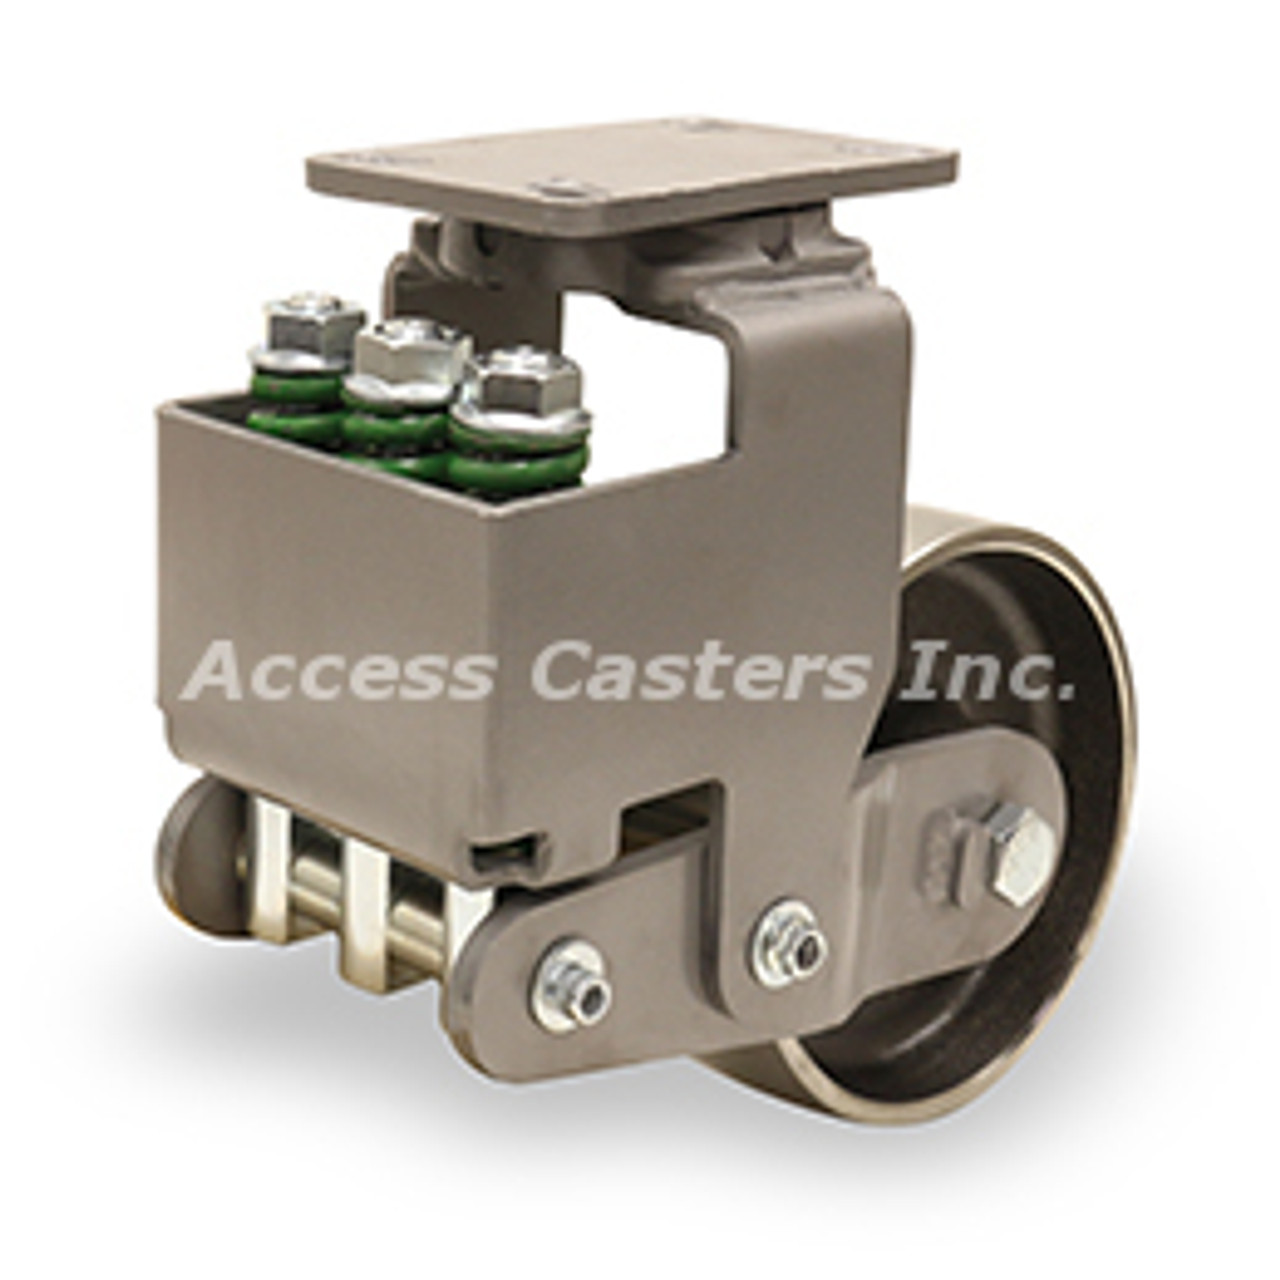 S-AEZFFM-63FSB Spring loaded caster with 6" x 3" Forged Steel wheel